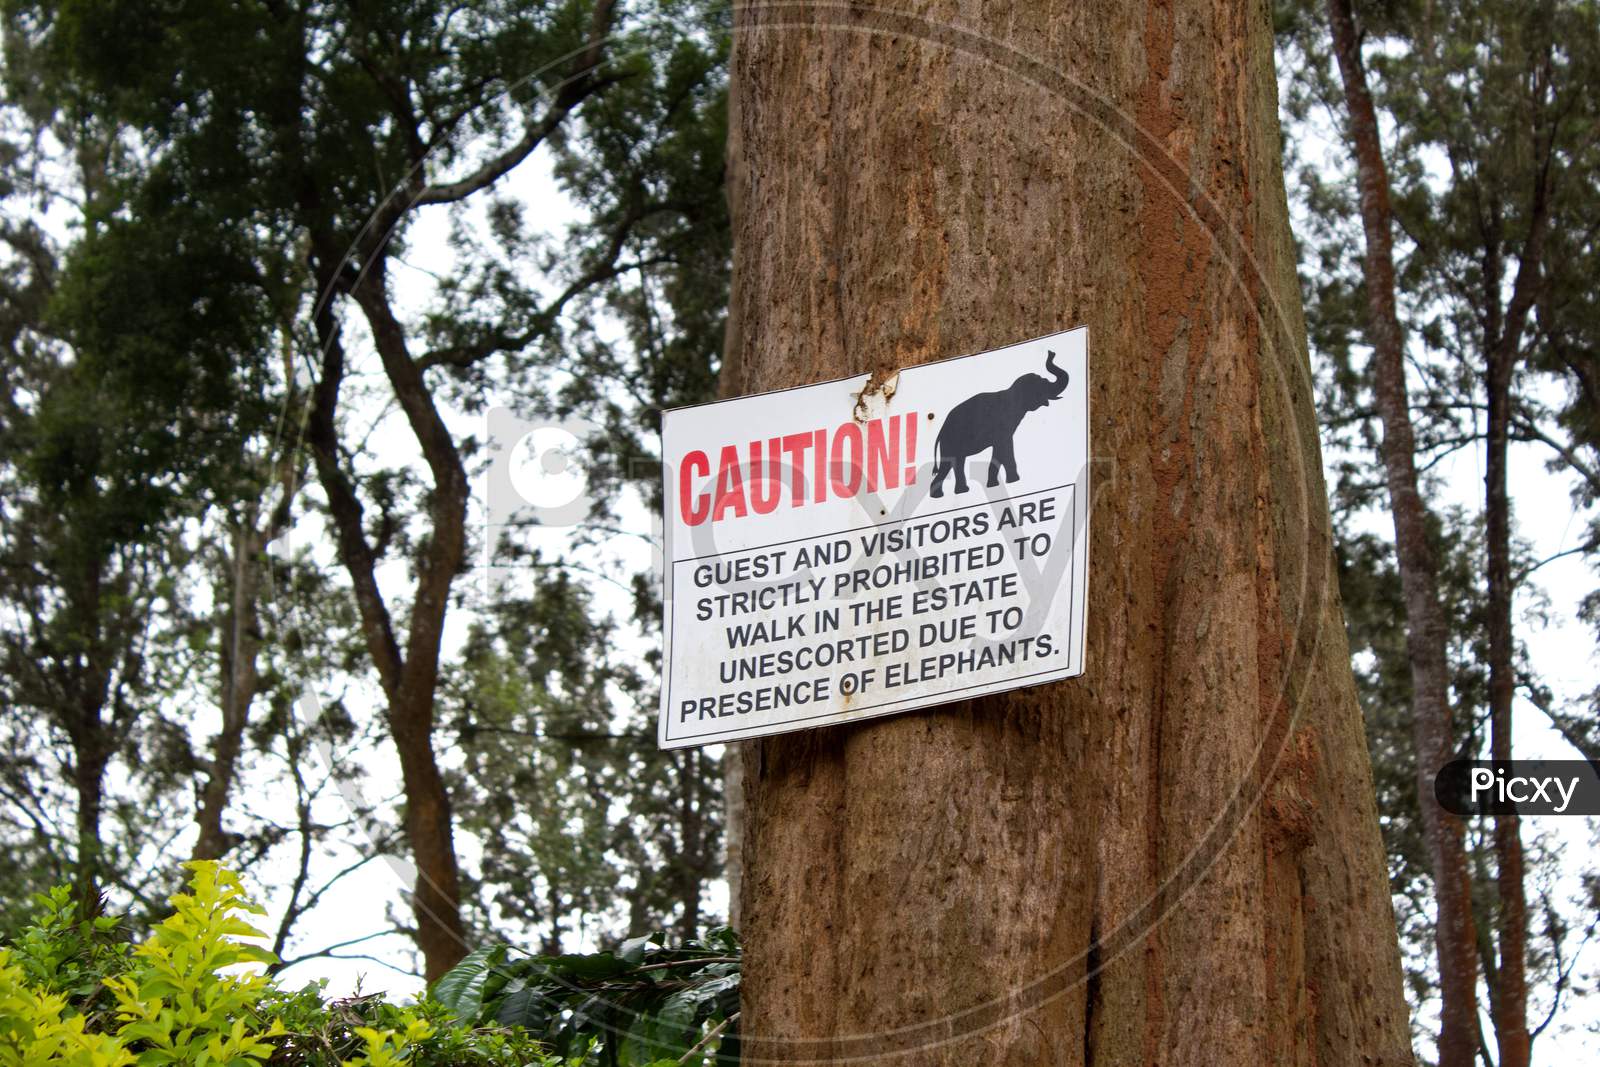 Wild Elephant Warning sign for guests in Tata Coffee plantations, Coorg.